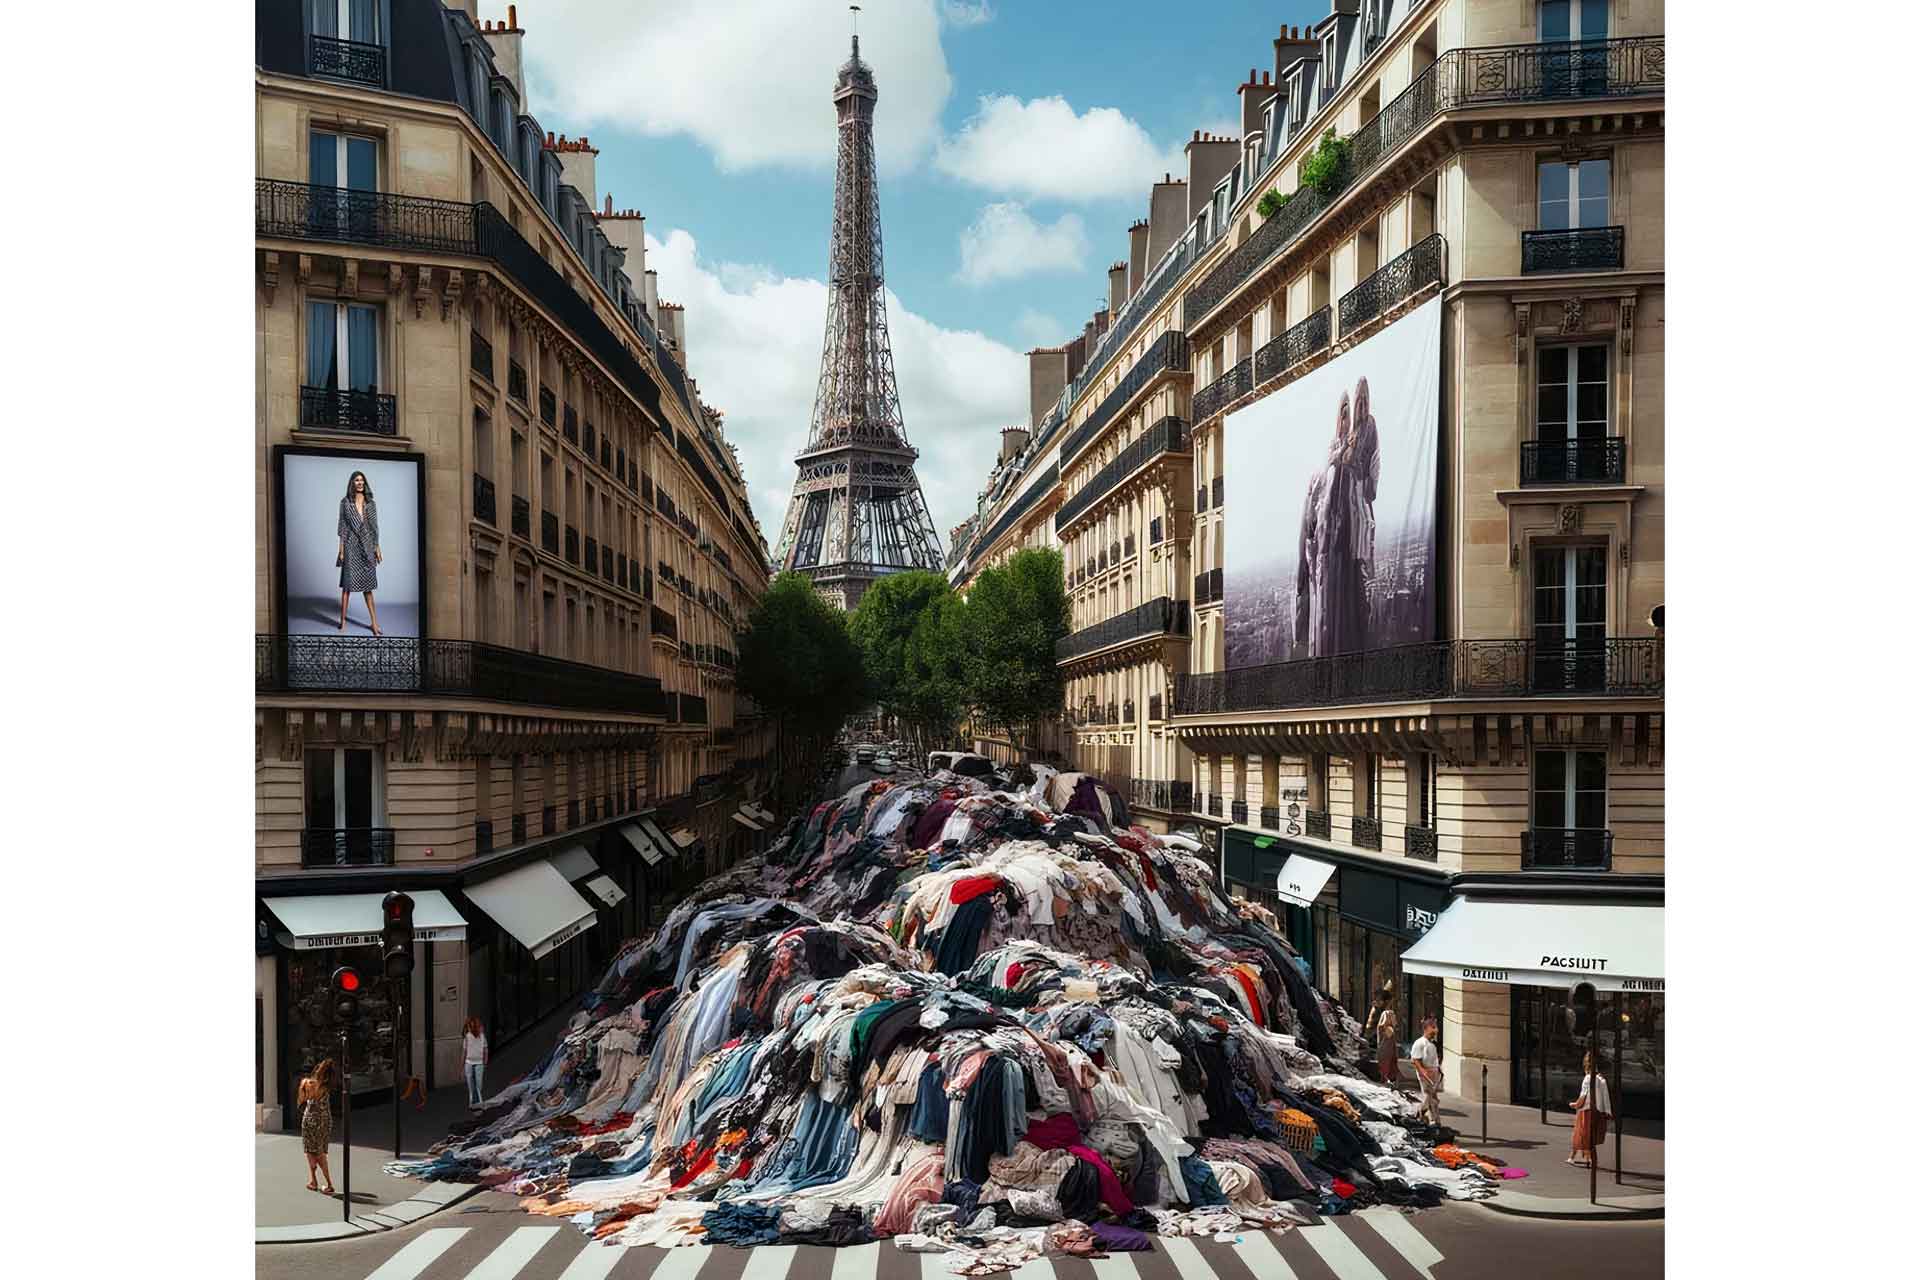 AI image of fashion waste piled up in front of the Eiffel Tower